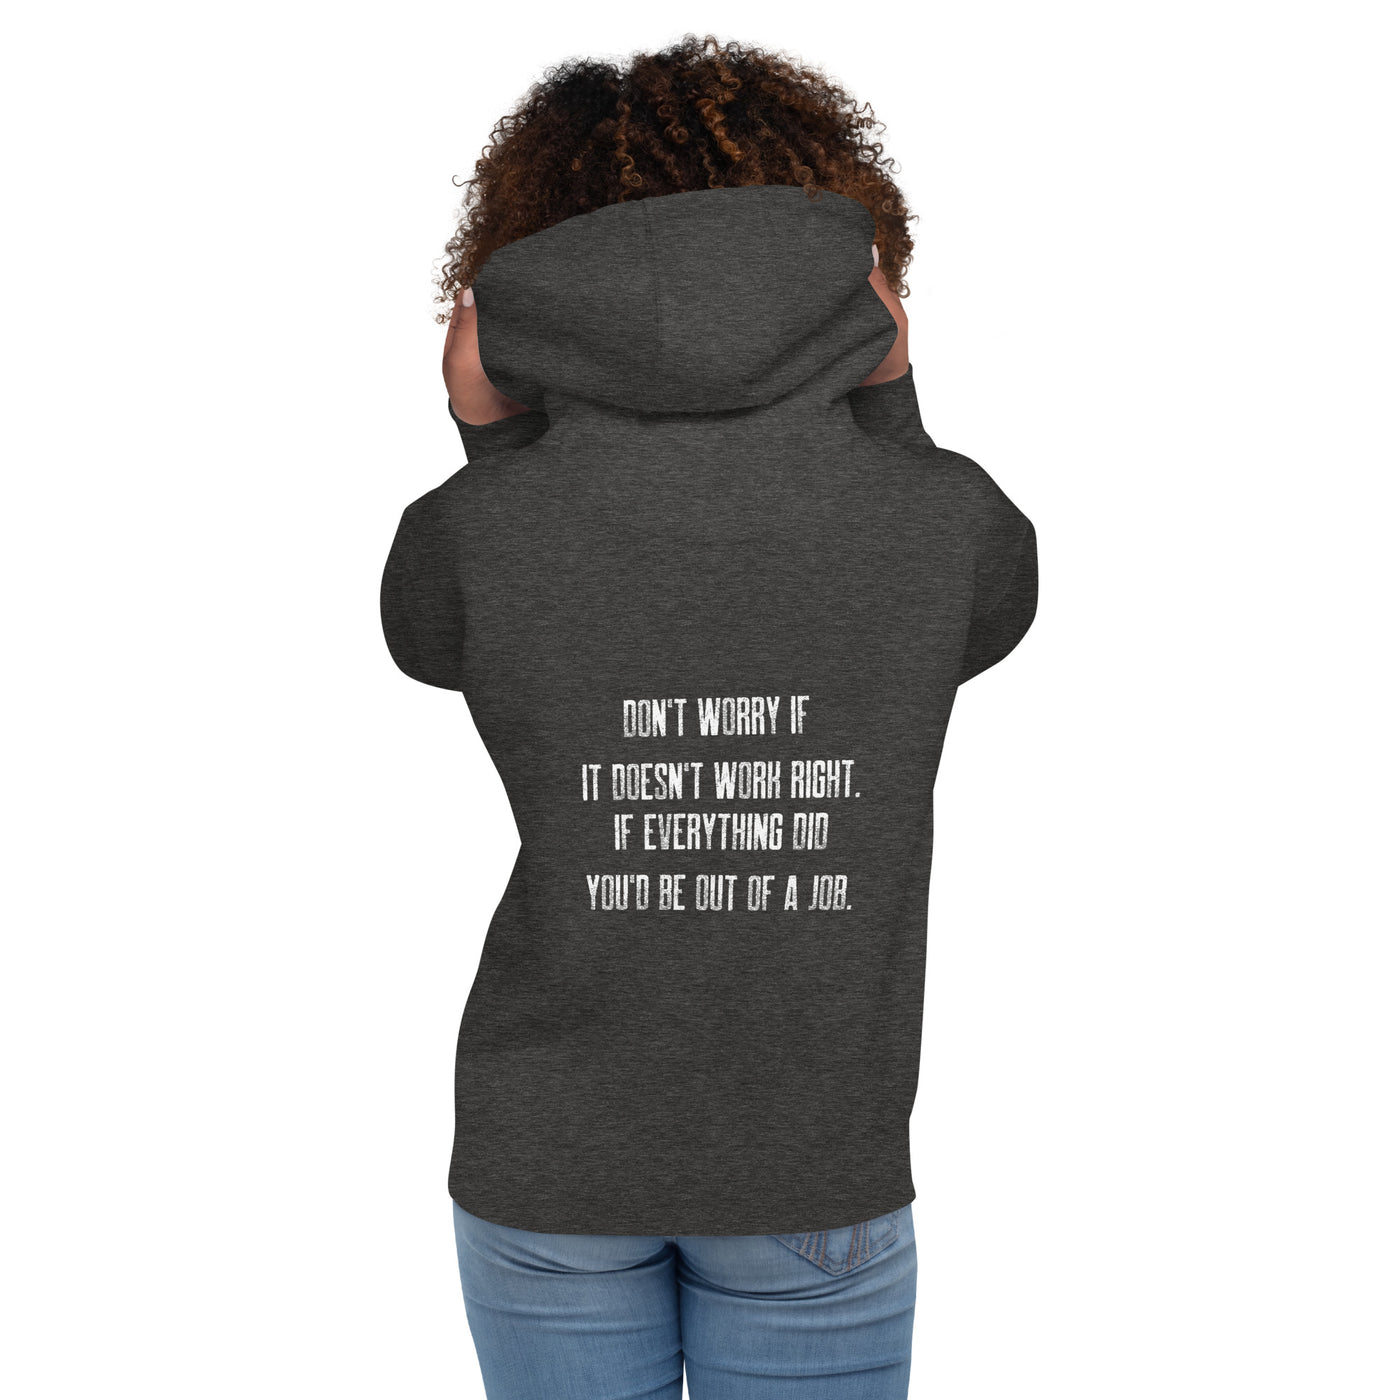 Don't worry if it doesn't work right: if everything did, you would be out of your job V2 - Unisex Hoodie ( Back Print )